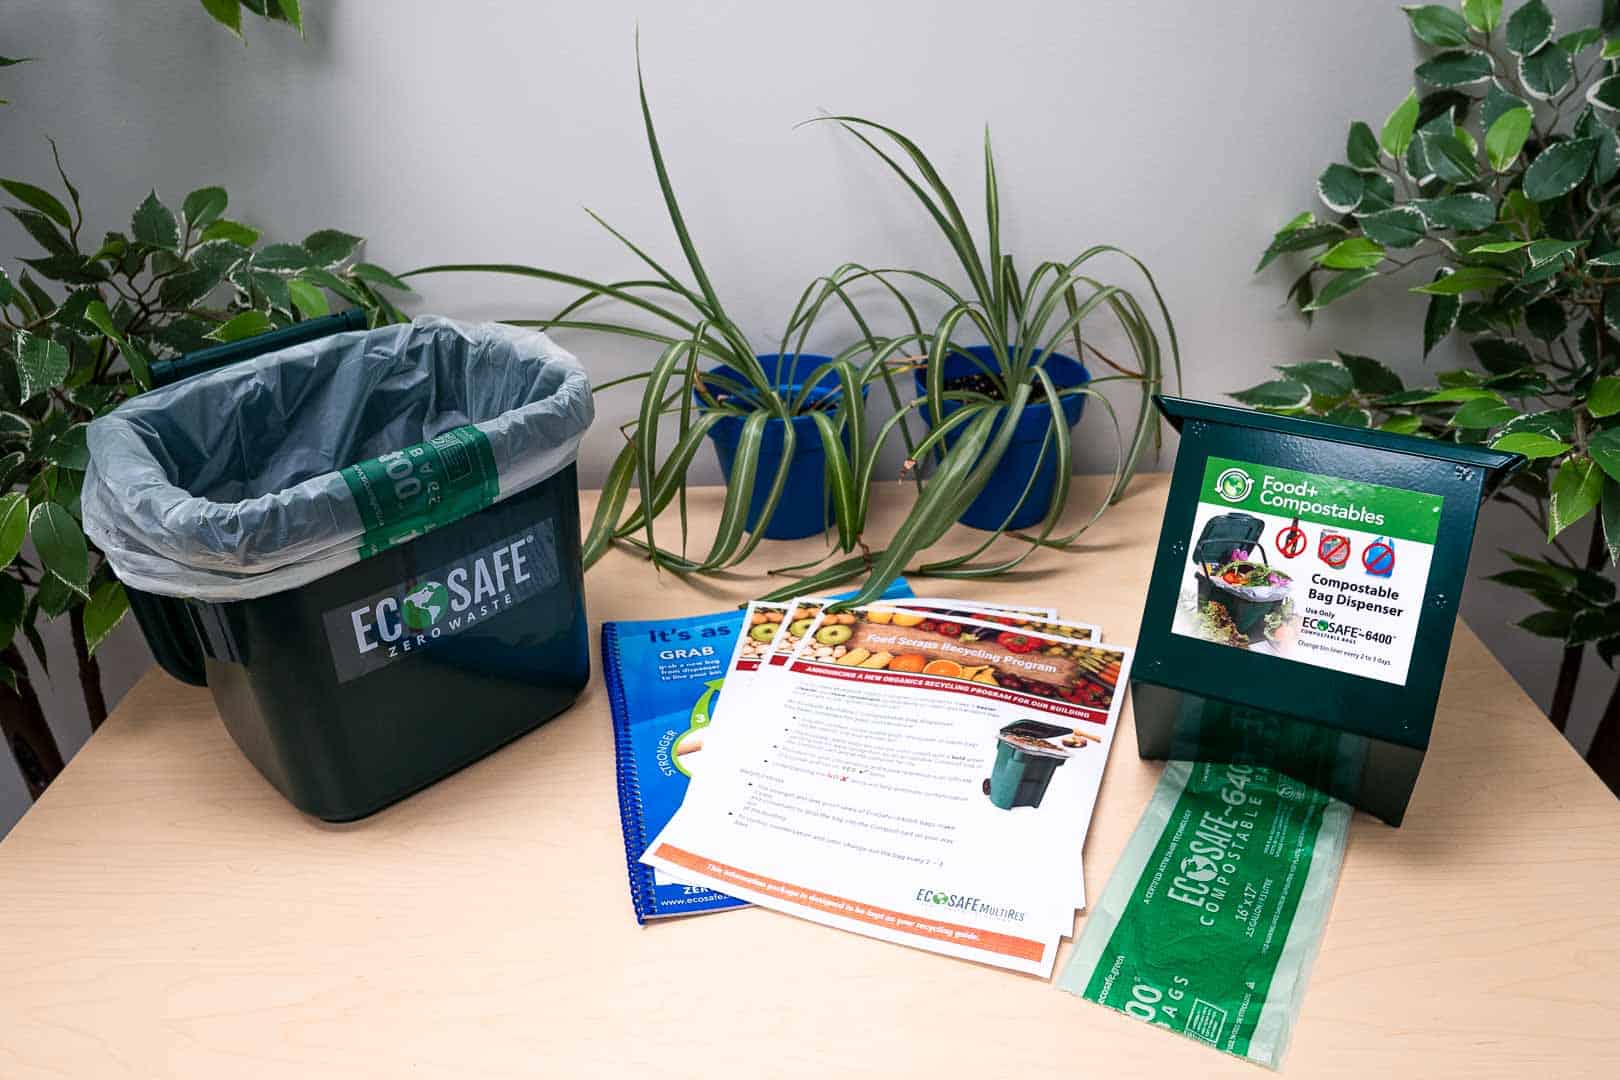 Ecosafe Green | Zero waste - paper and recycling bin